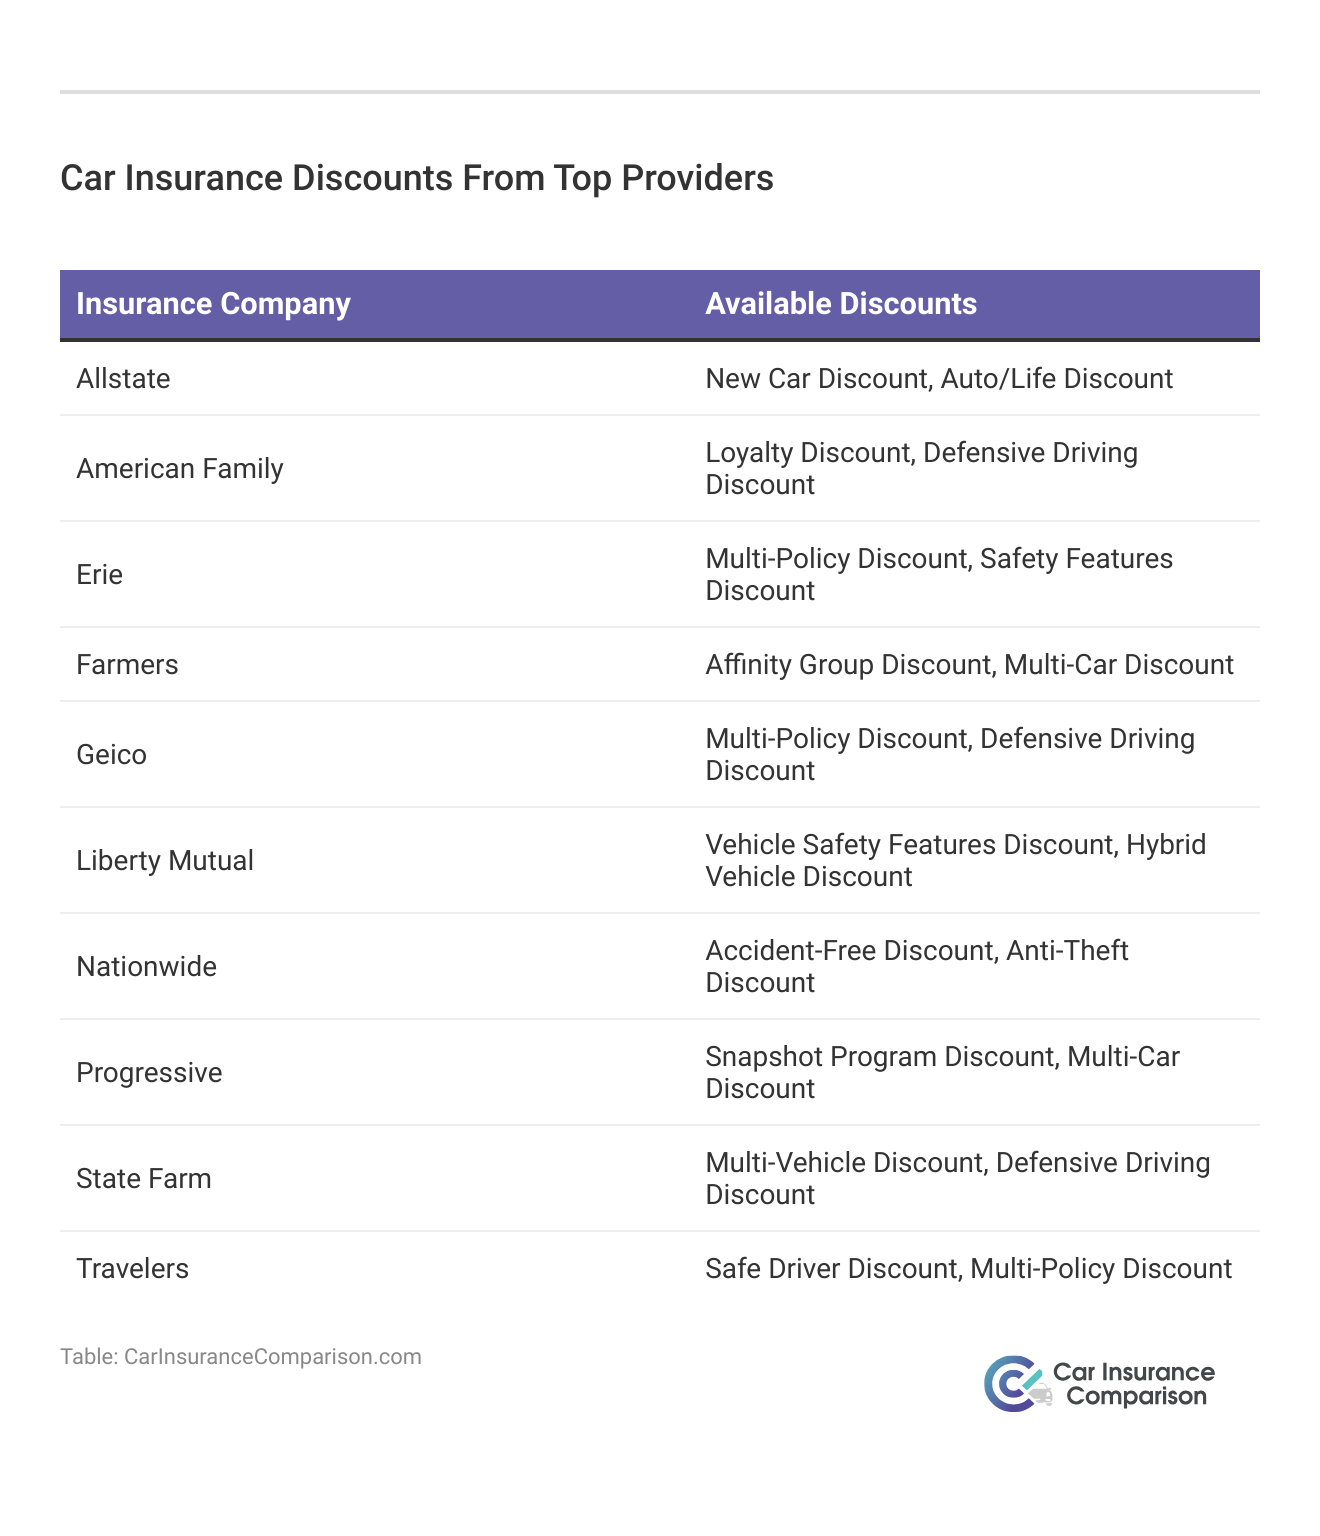 <h3>Car Insurance Discounts From Top Providers</h3>